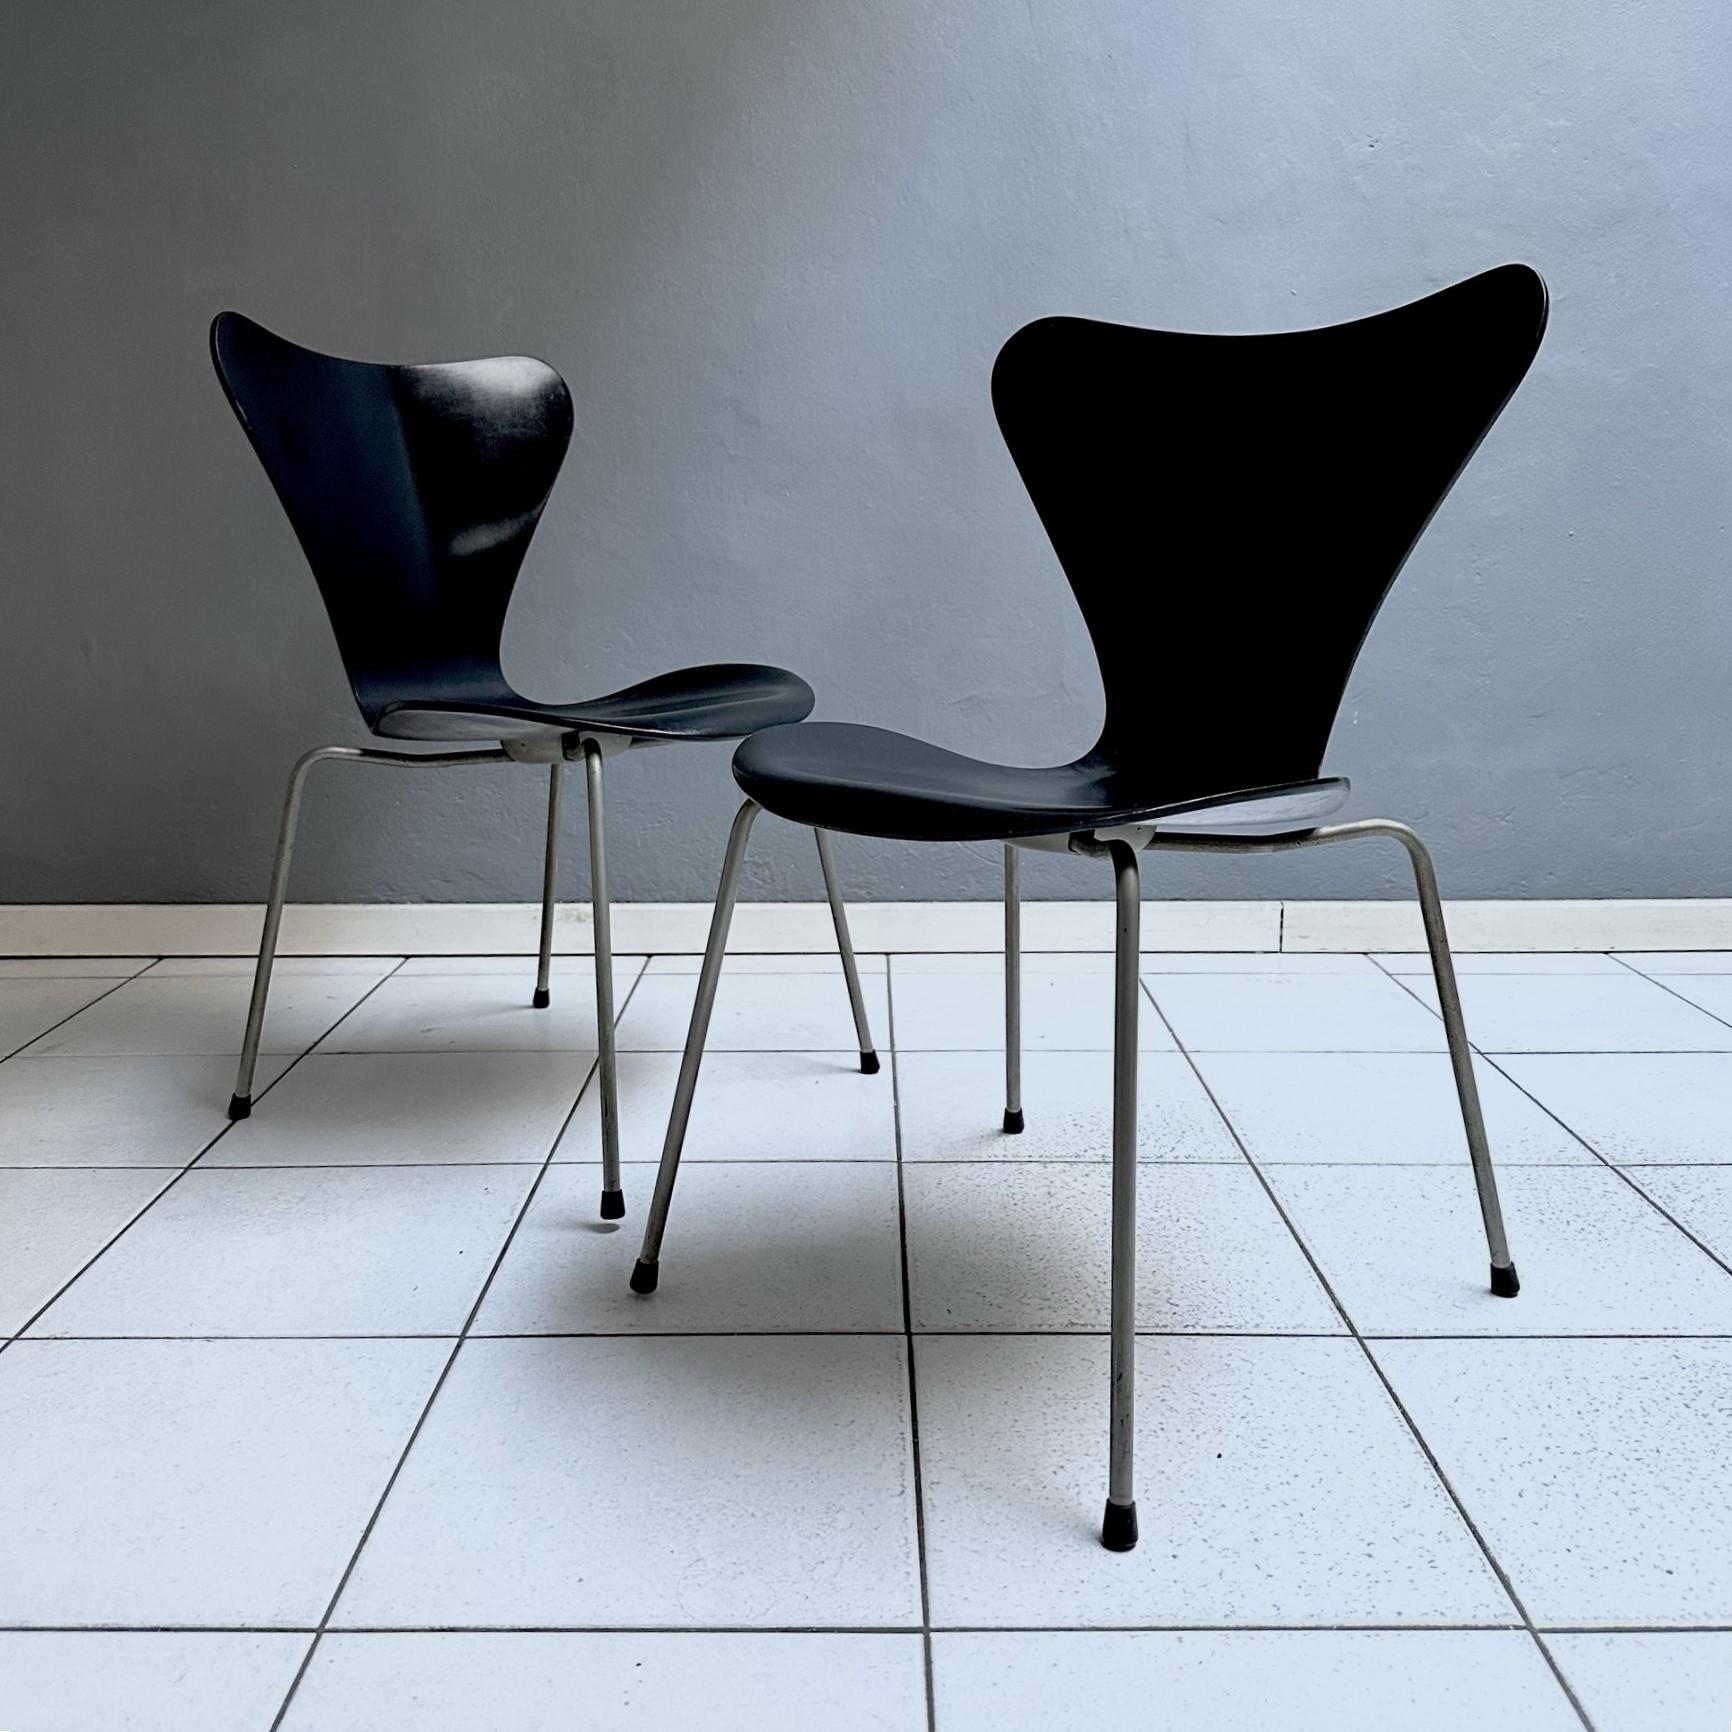 Pair of chairs mod. 3107 designed by Arne Jacobsen for the Danish furniture manufacturer Fritz Hansen in 1973.
The black lacquered seat shell is made of plywood, chromed metal structure.
The authenticity mark is imprinted under the seat.